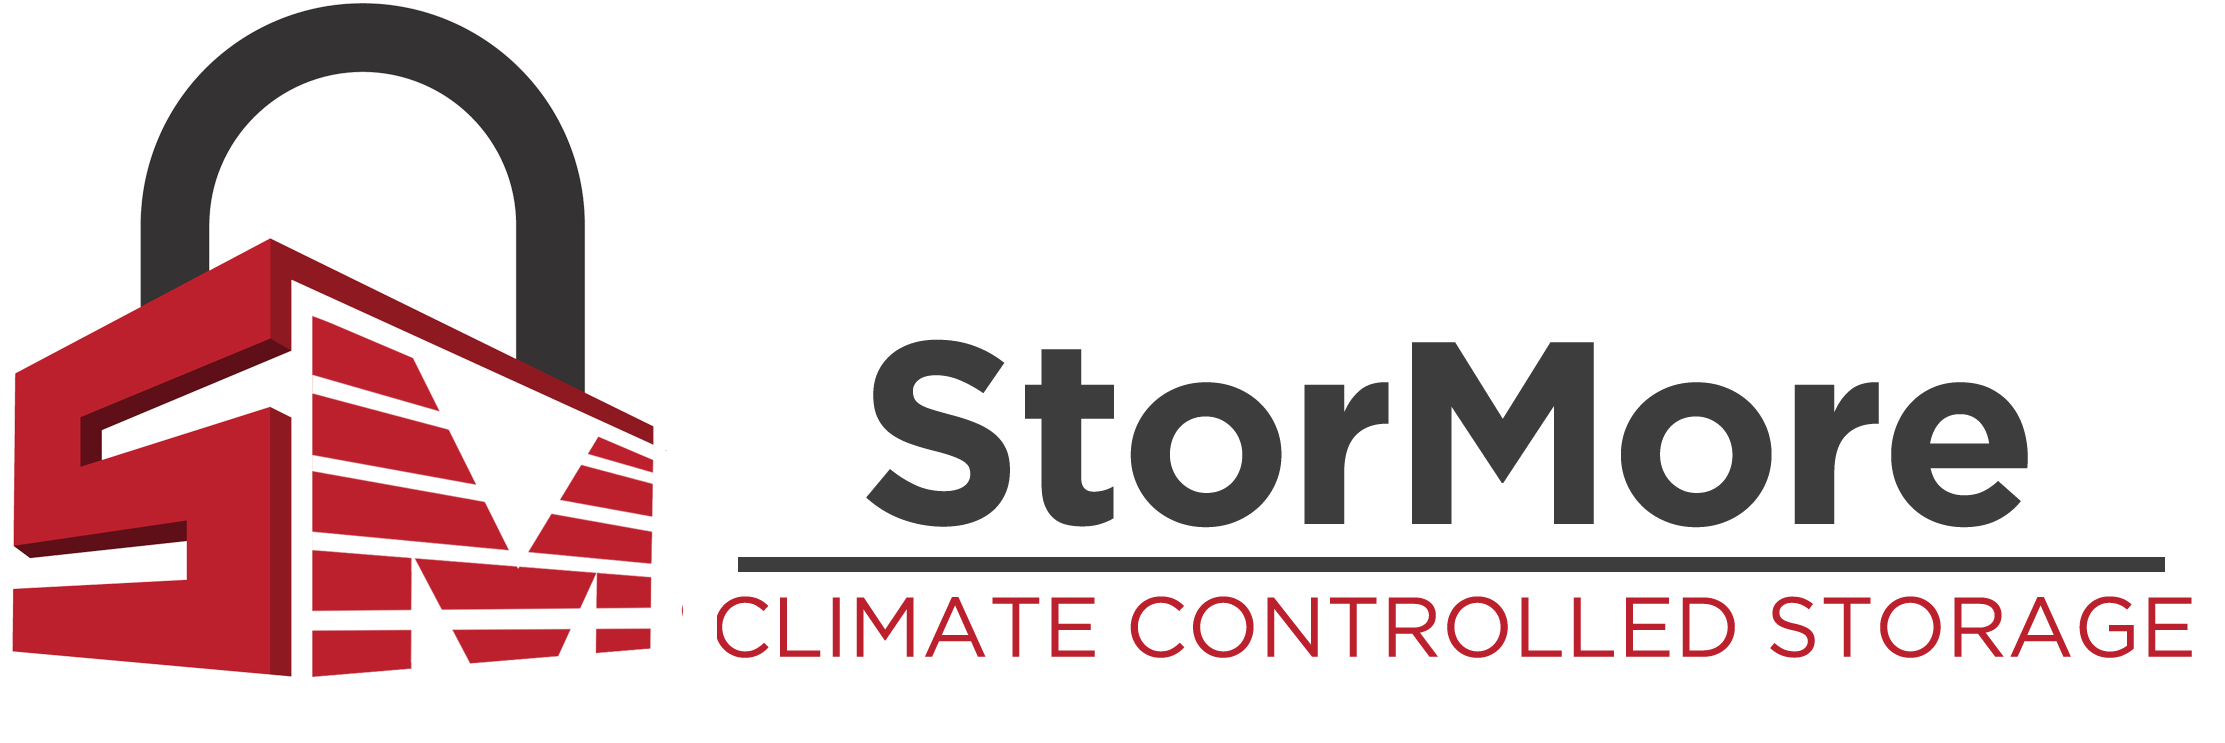 StorMore Climate Controlled Storage Logo